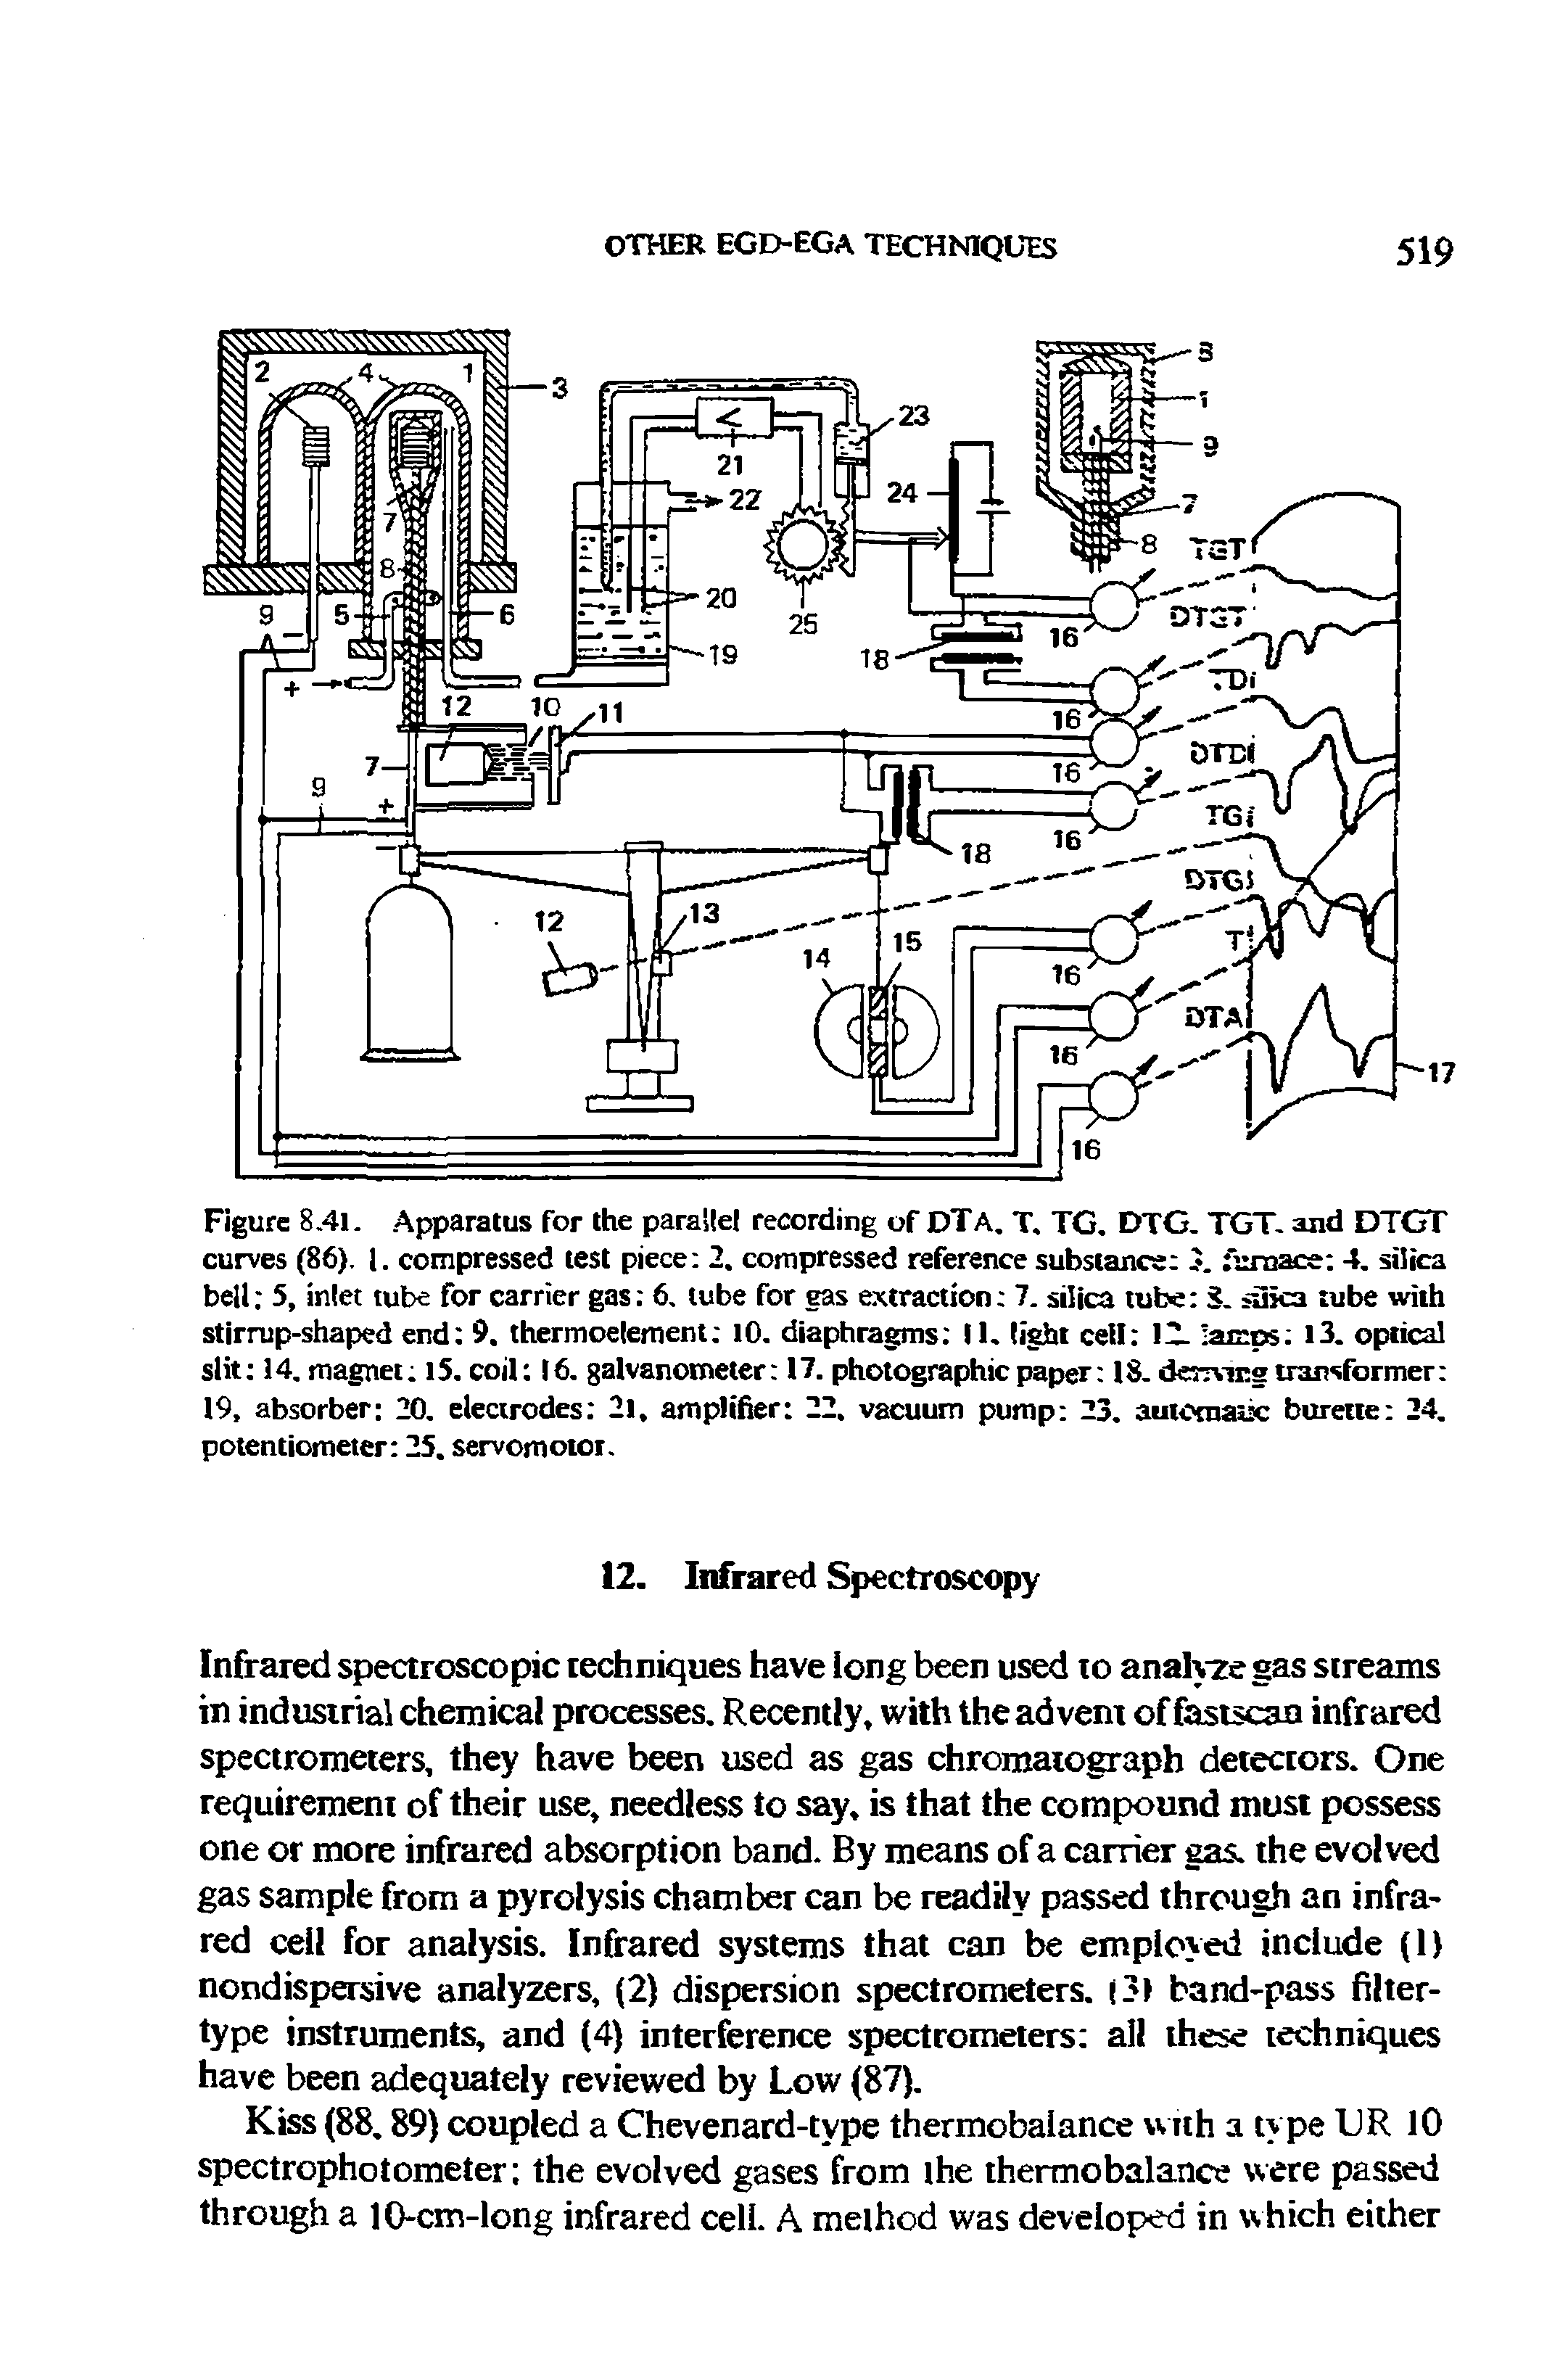 Figure 8.4l. Apparatus for the parallel recording of DTA. T, TG. DTG. TGT- and DTGT curves (86). 1. compressed test piece 2. compressed reference substance 2. furnace 4. silica bell 5, inlet tube for carrier gas 6. tube for eas extraction 7. silica tube S. suka tube with stirrup-shaped end 9. thermoelement 10. diaphragms 11. light cell 12- lamps l3. optical slit 14. magnet l5. coil 16. galvanometer 17. photographic paper 18. damns transformer 19, absorber 20. electrodes 2l, amplifier 22. vacuum pump 23. automatic burette 24. potentiometer 25. servomotor.